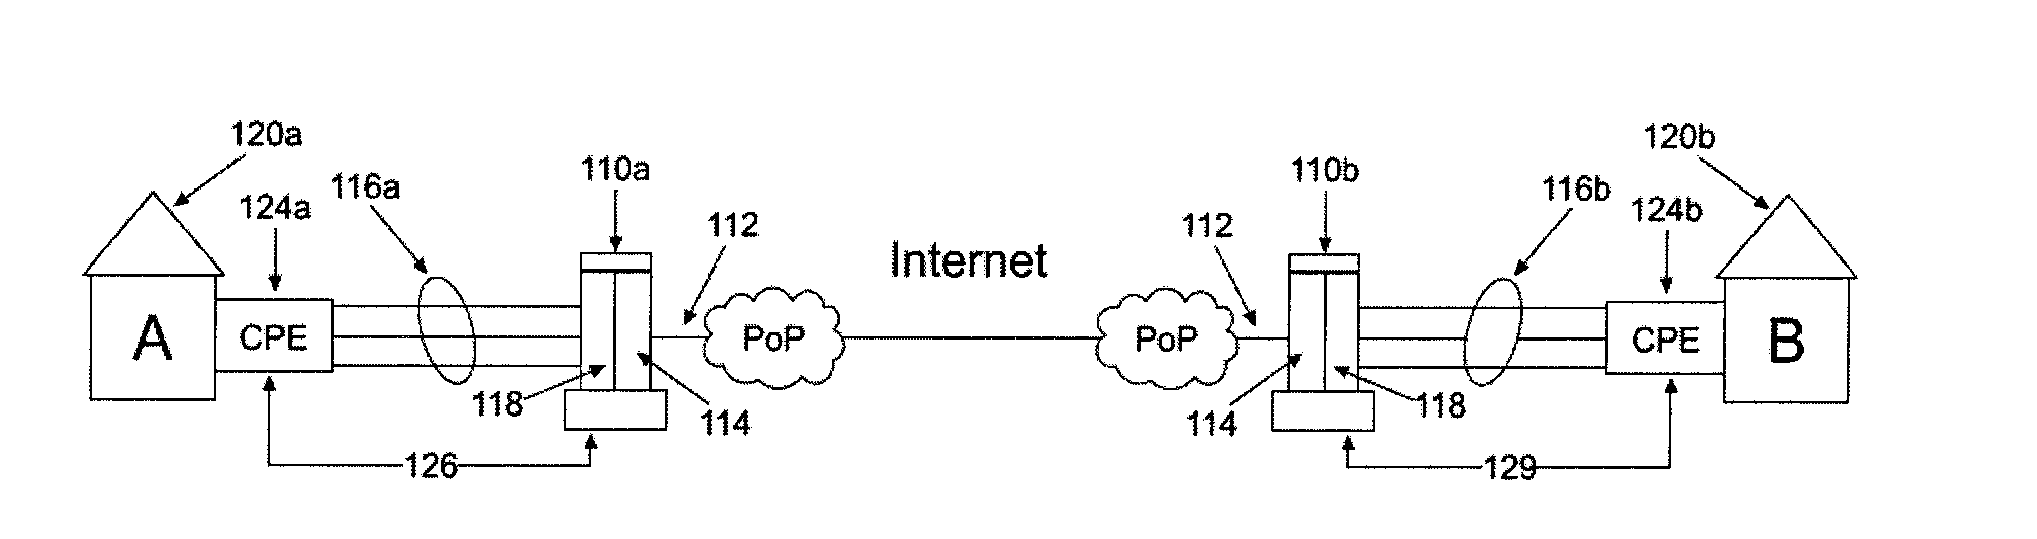 System, apparatus and method for providing improved performance of aggregated/bonded network connections between remote sites